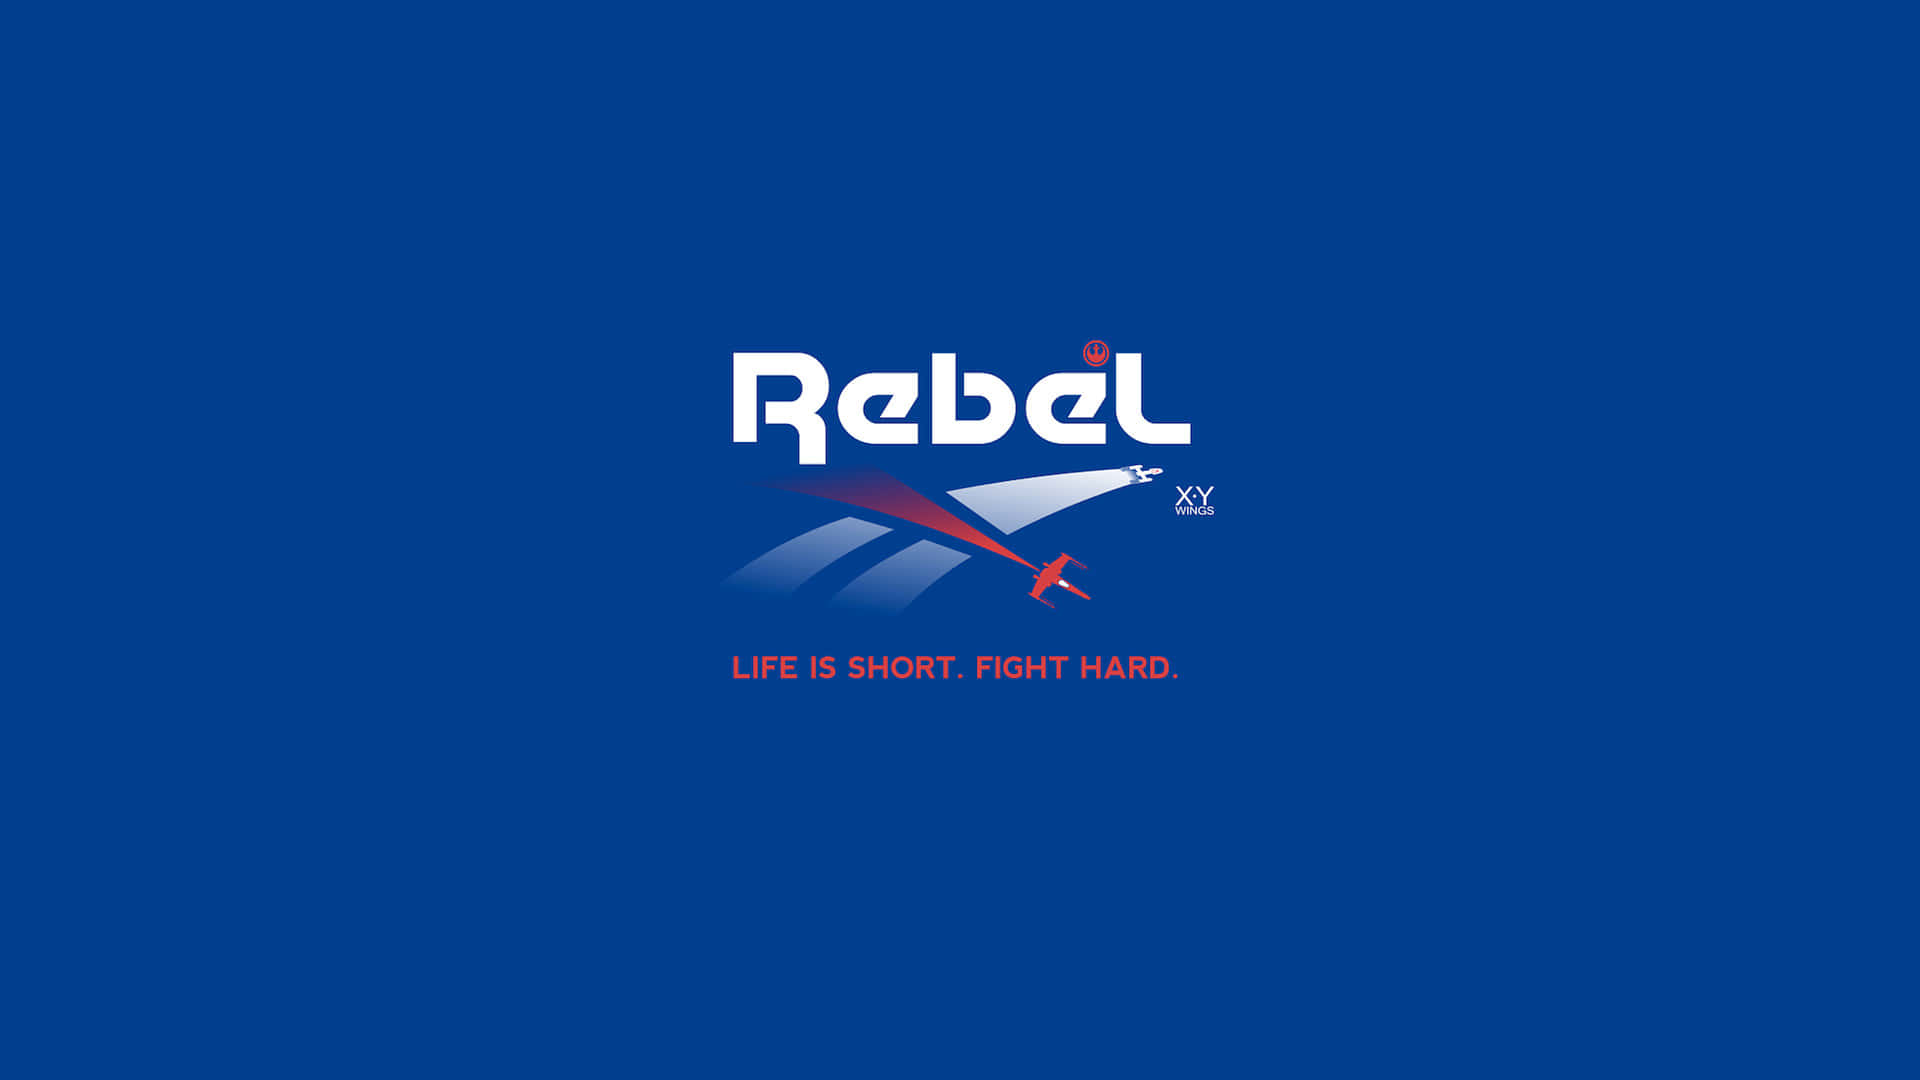 Feel motivated with in-style Reebok shoes